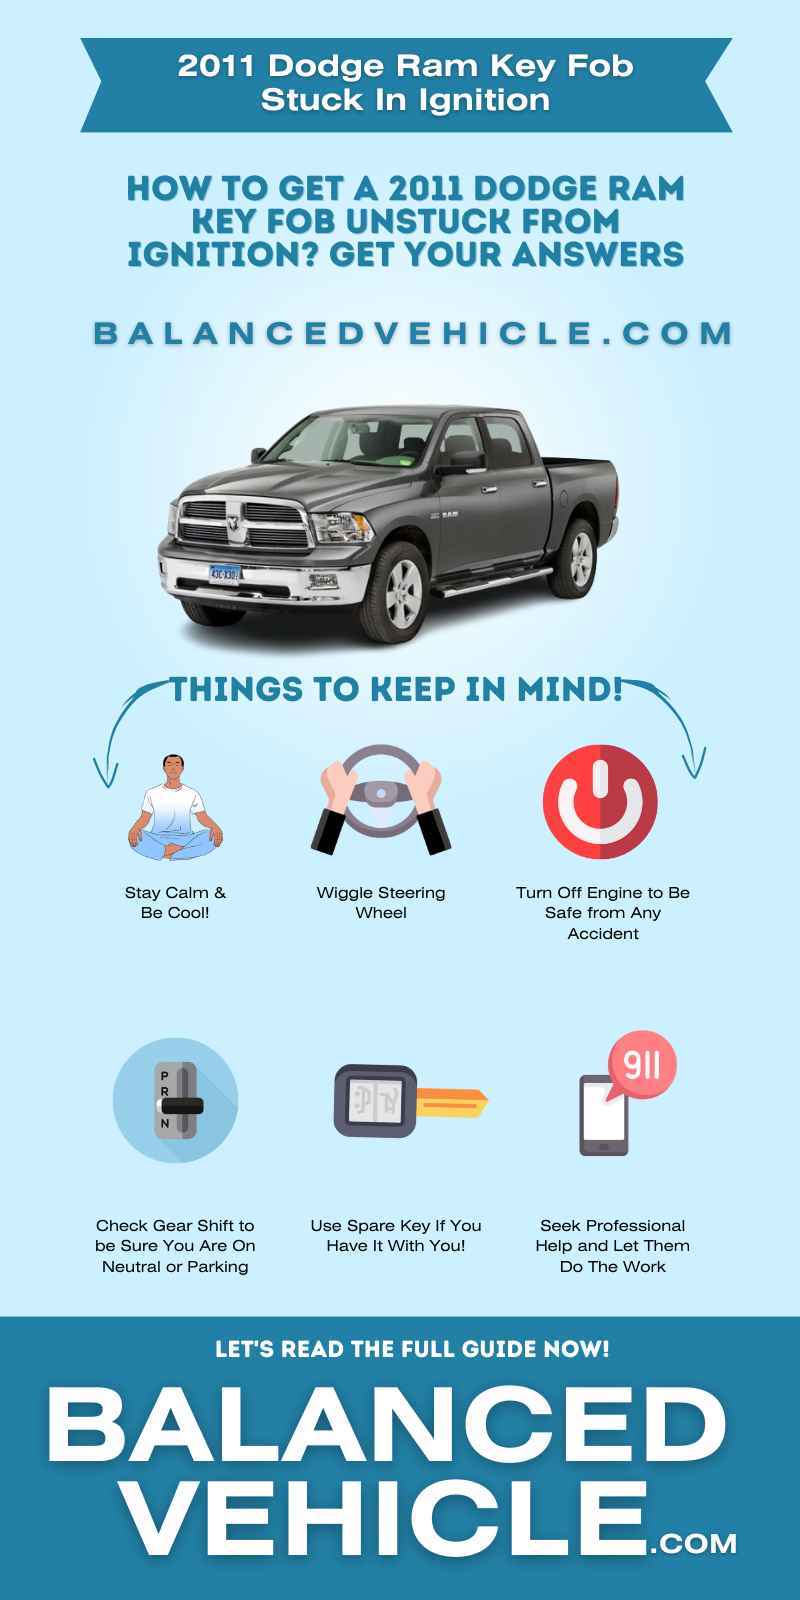 2011 Dodge Ram key fob stuck in ignition - Infographic